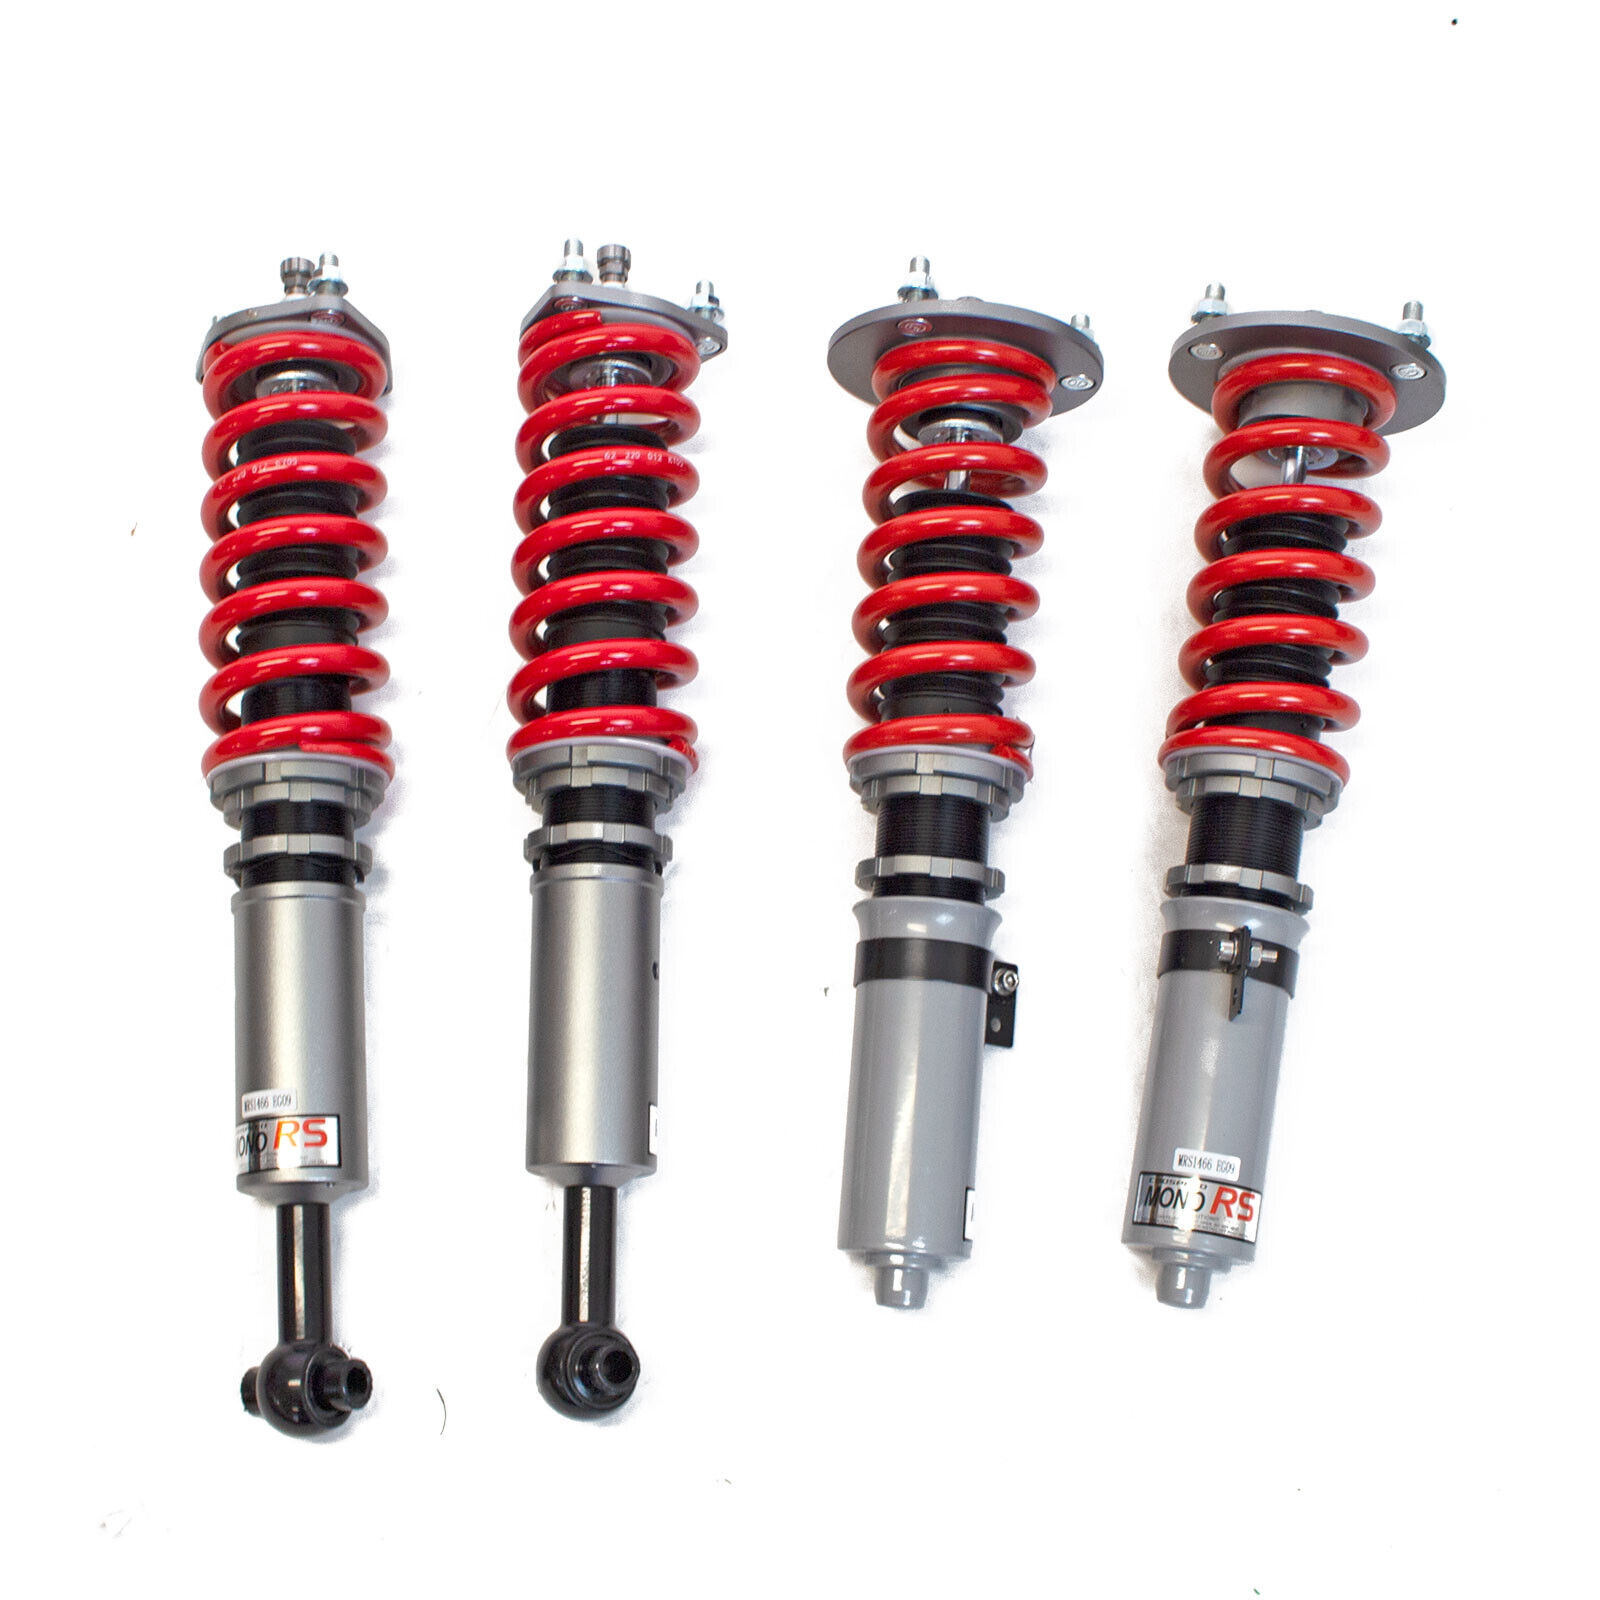 Godspeed GSP Mono RS Coilovers Suspension for Lexus IS250 IS350 ISF AWD 06-13